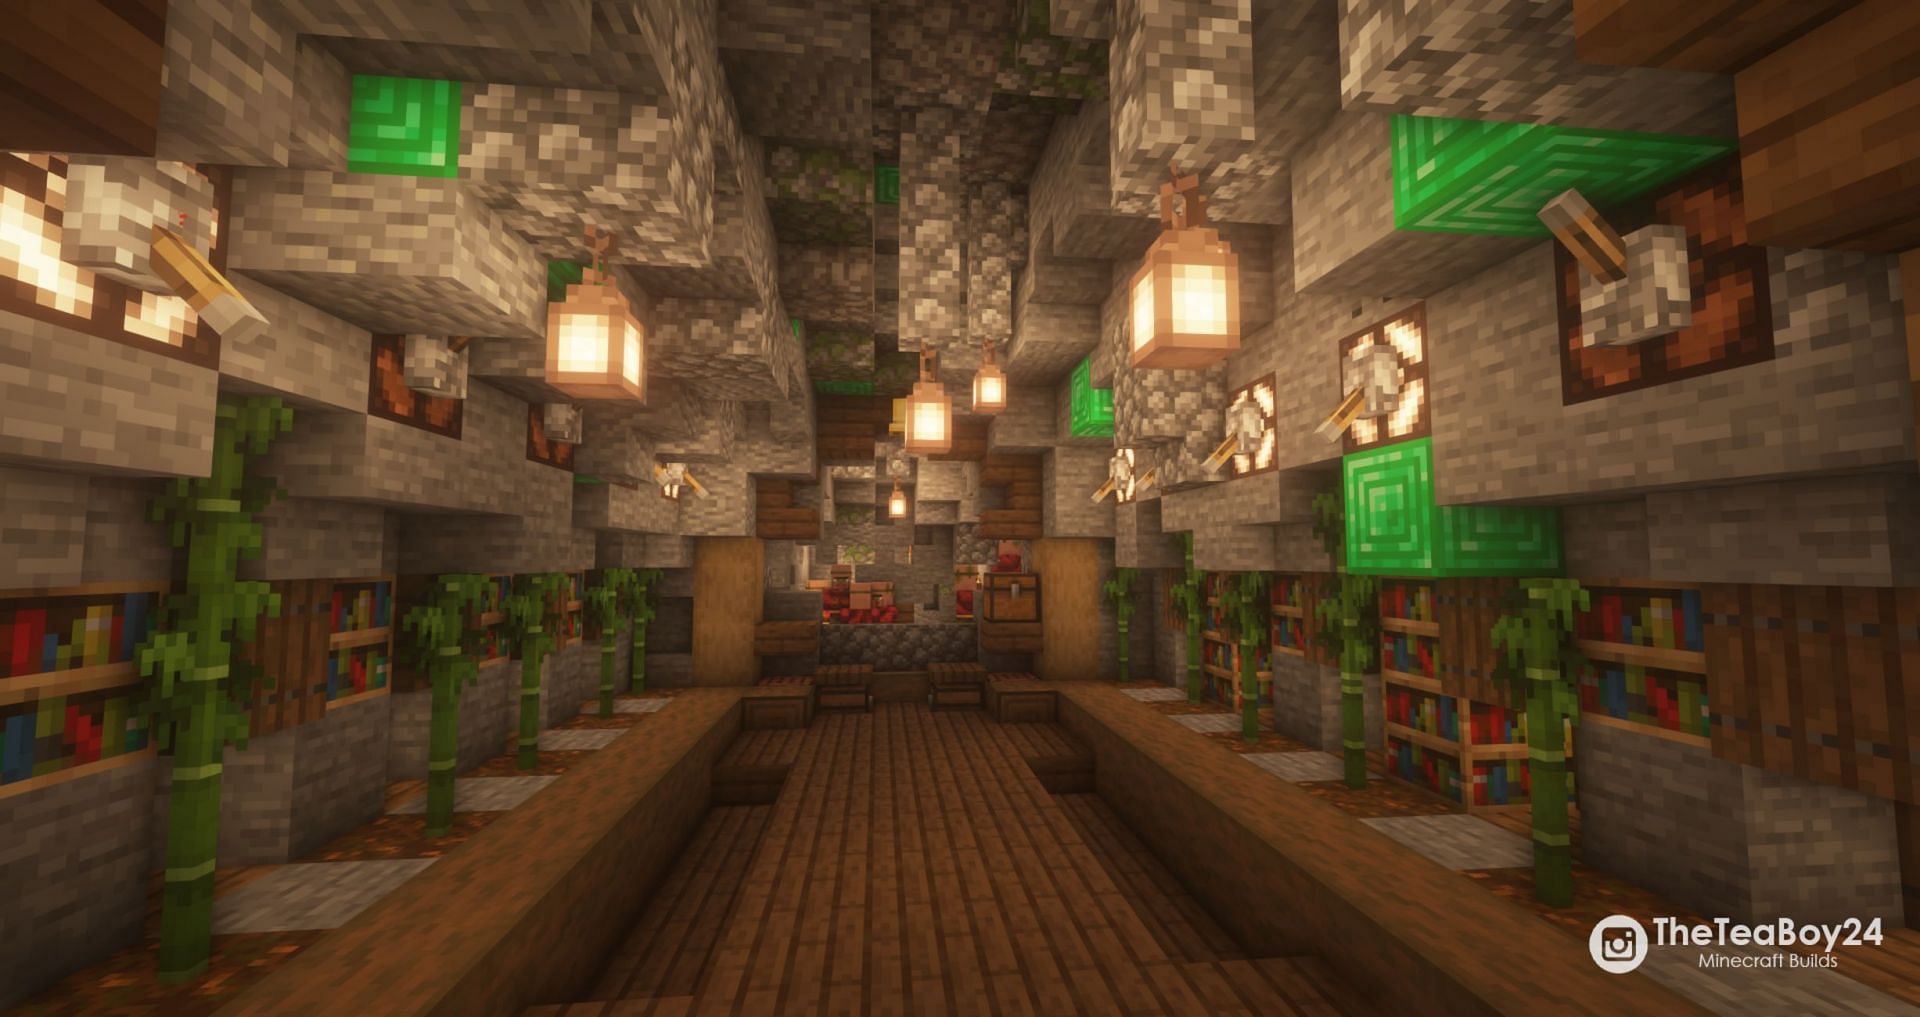 This trading hall includes natural elements while providing configurable windows (Image via TheTeaBoy24/Pinterest)